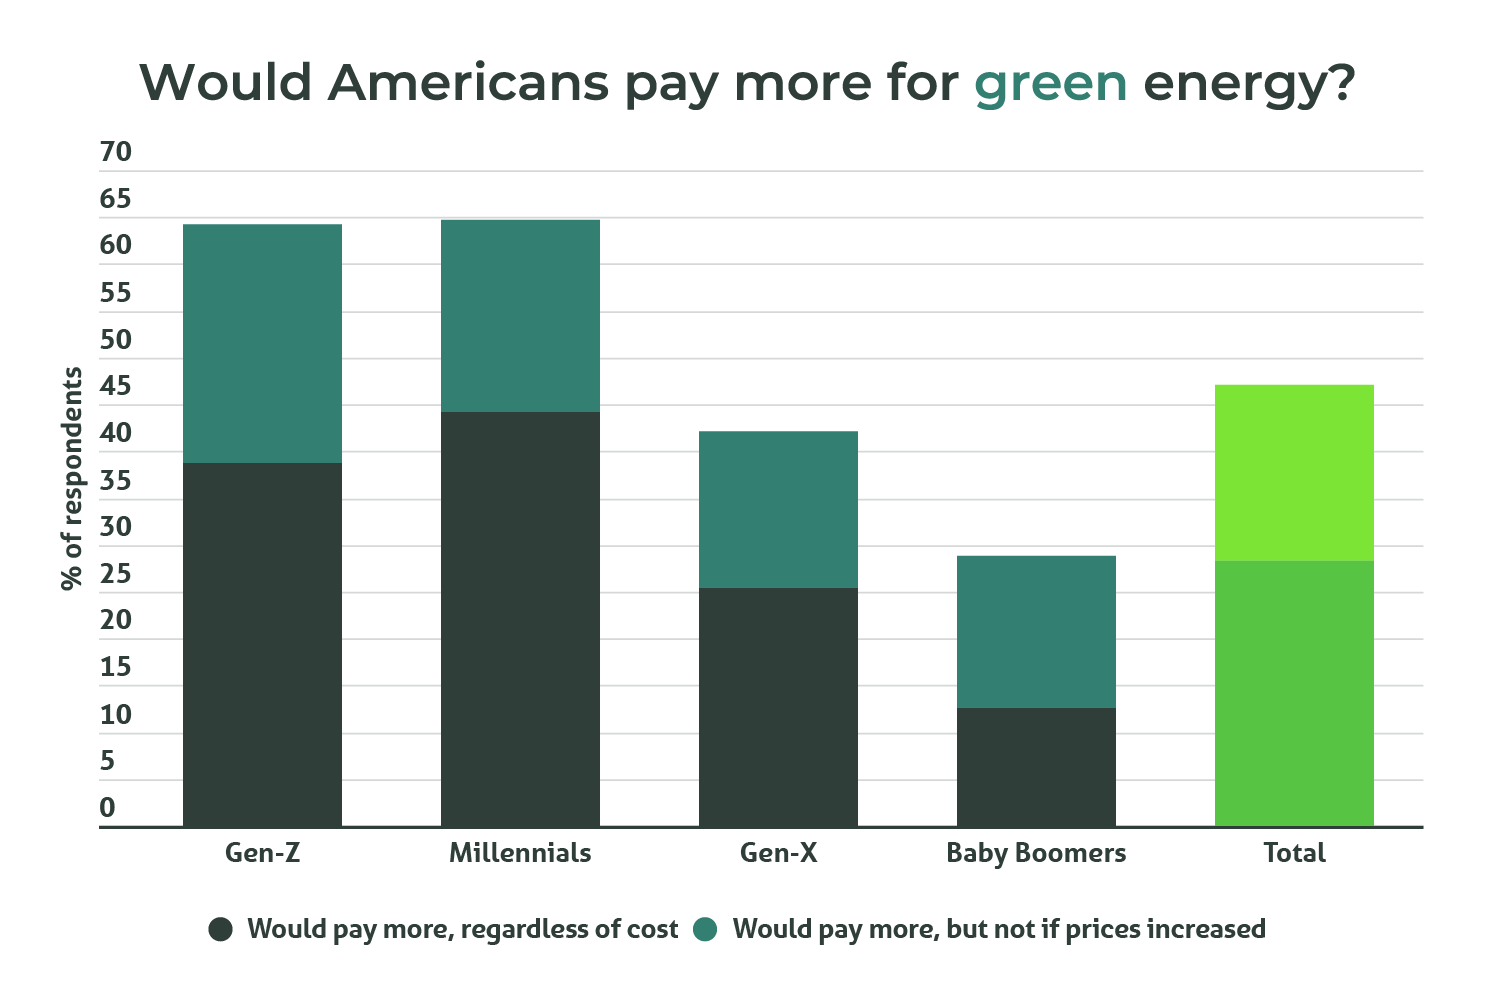 A column graph showing what percentage of Americans would pay more for green energy by age group